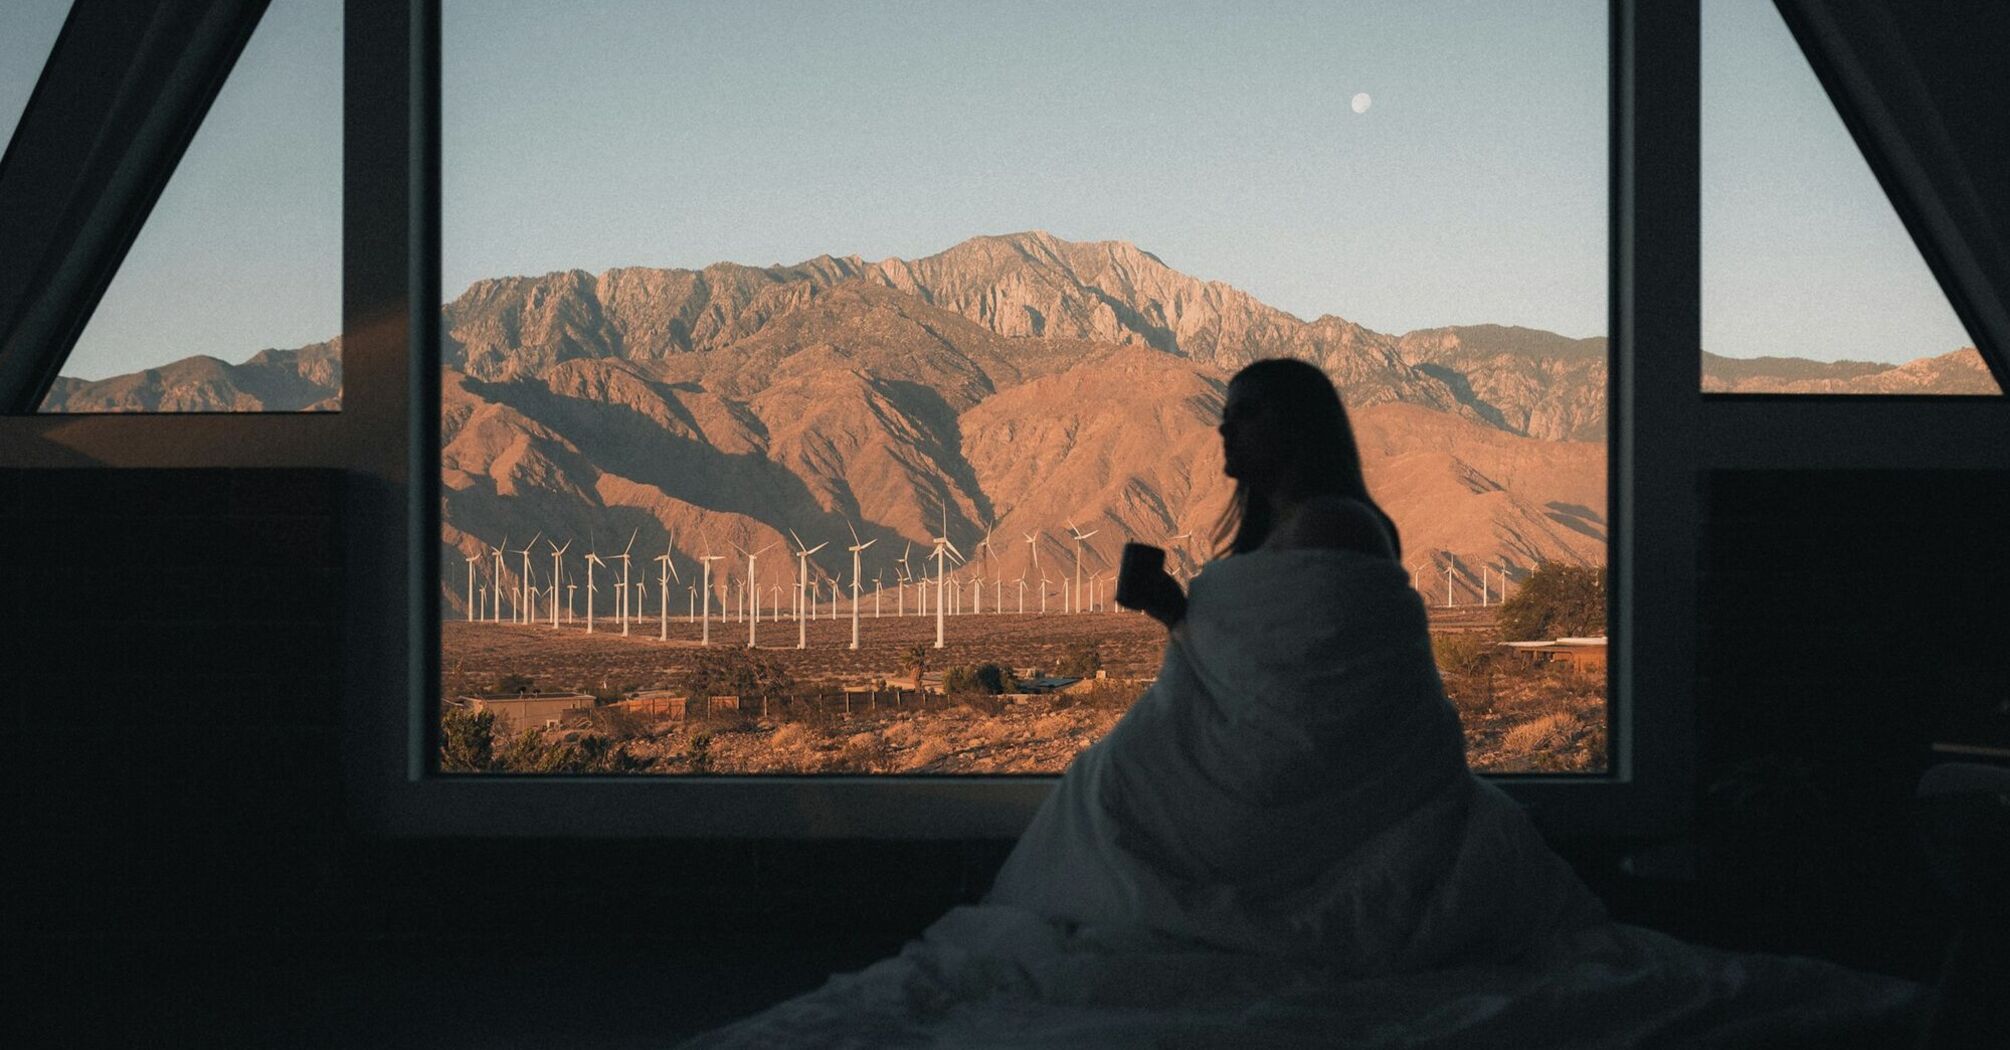 Person wrapped in a blanket looking out a large window at a mountainous landscape with wind turbines